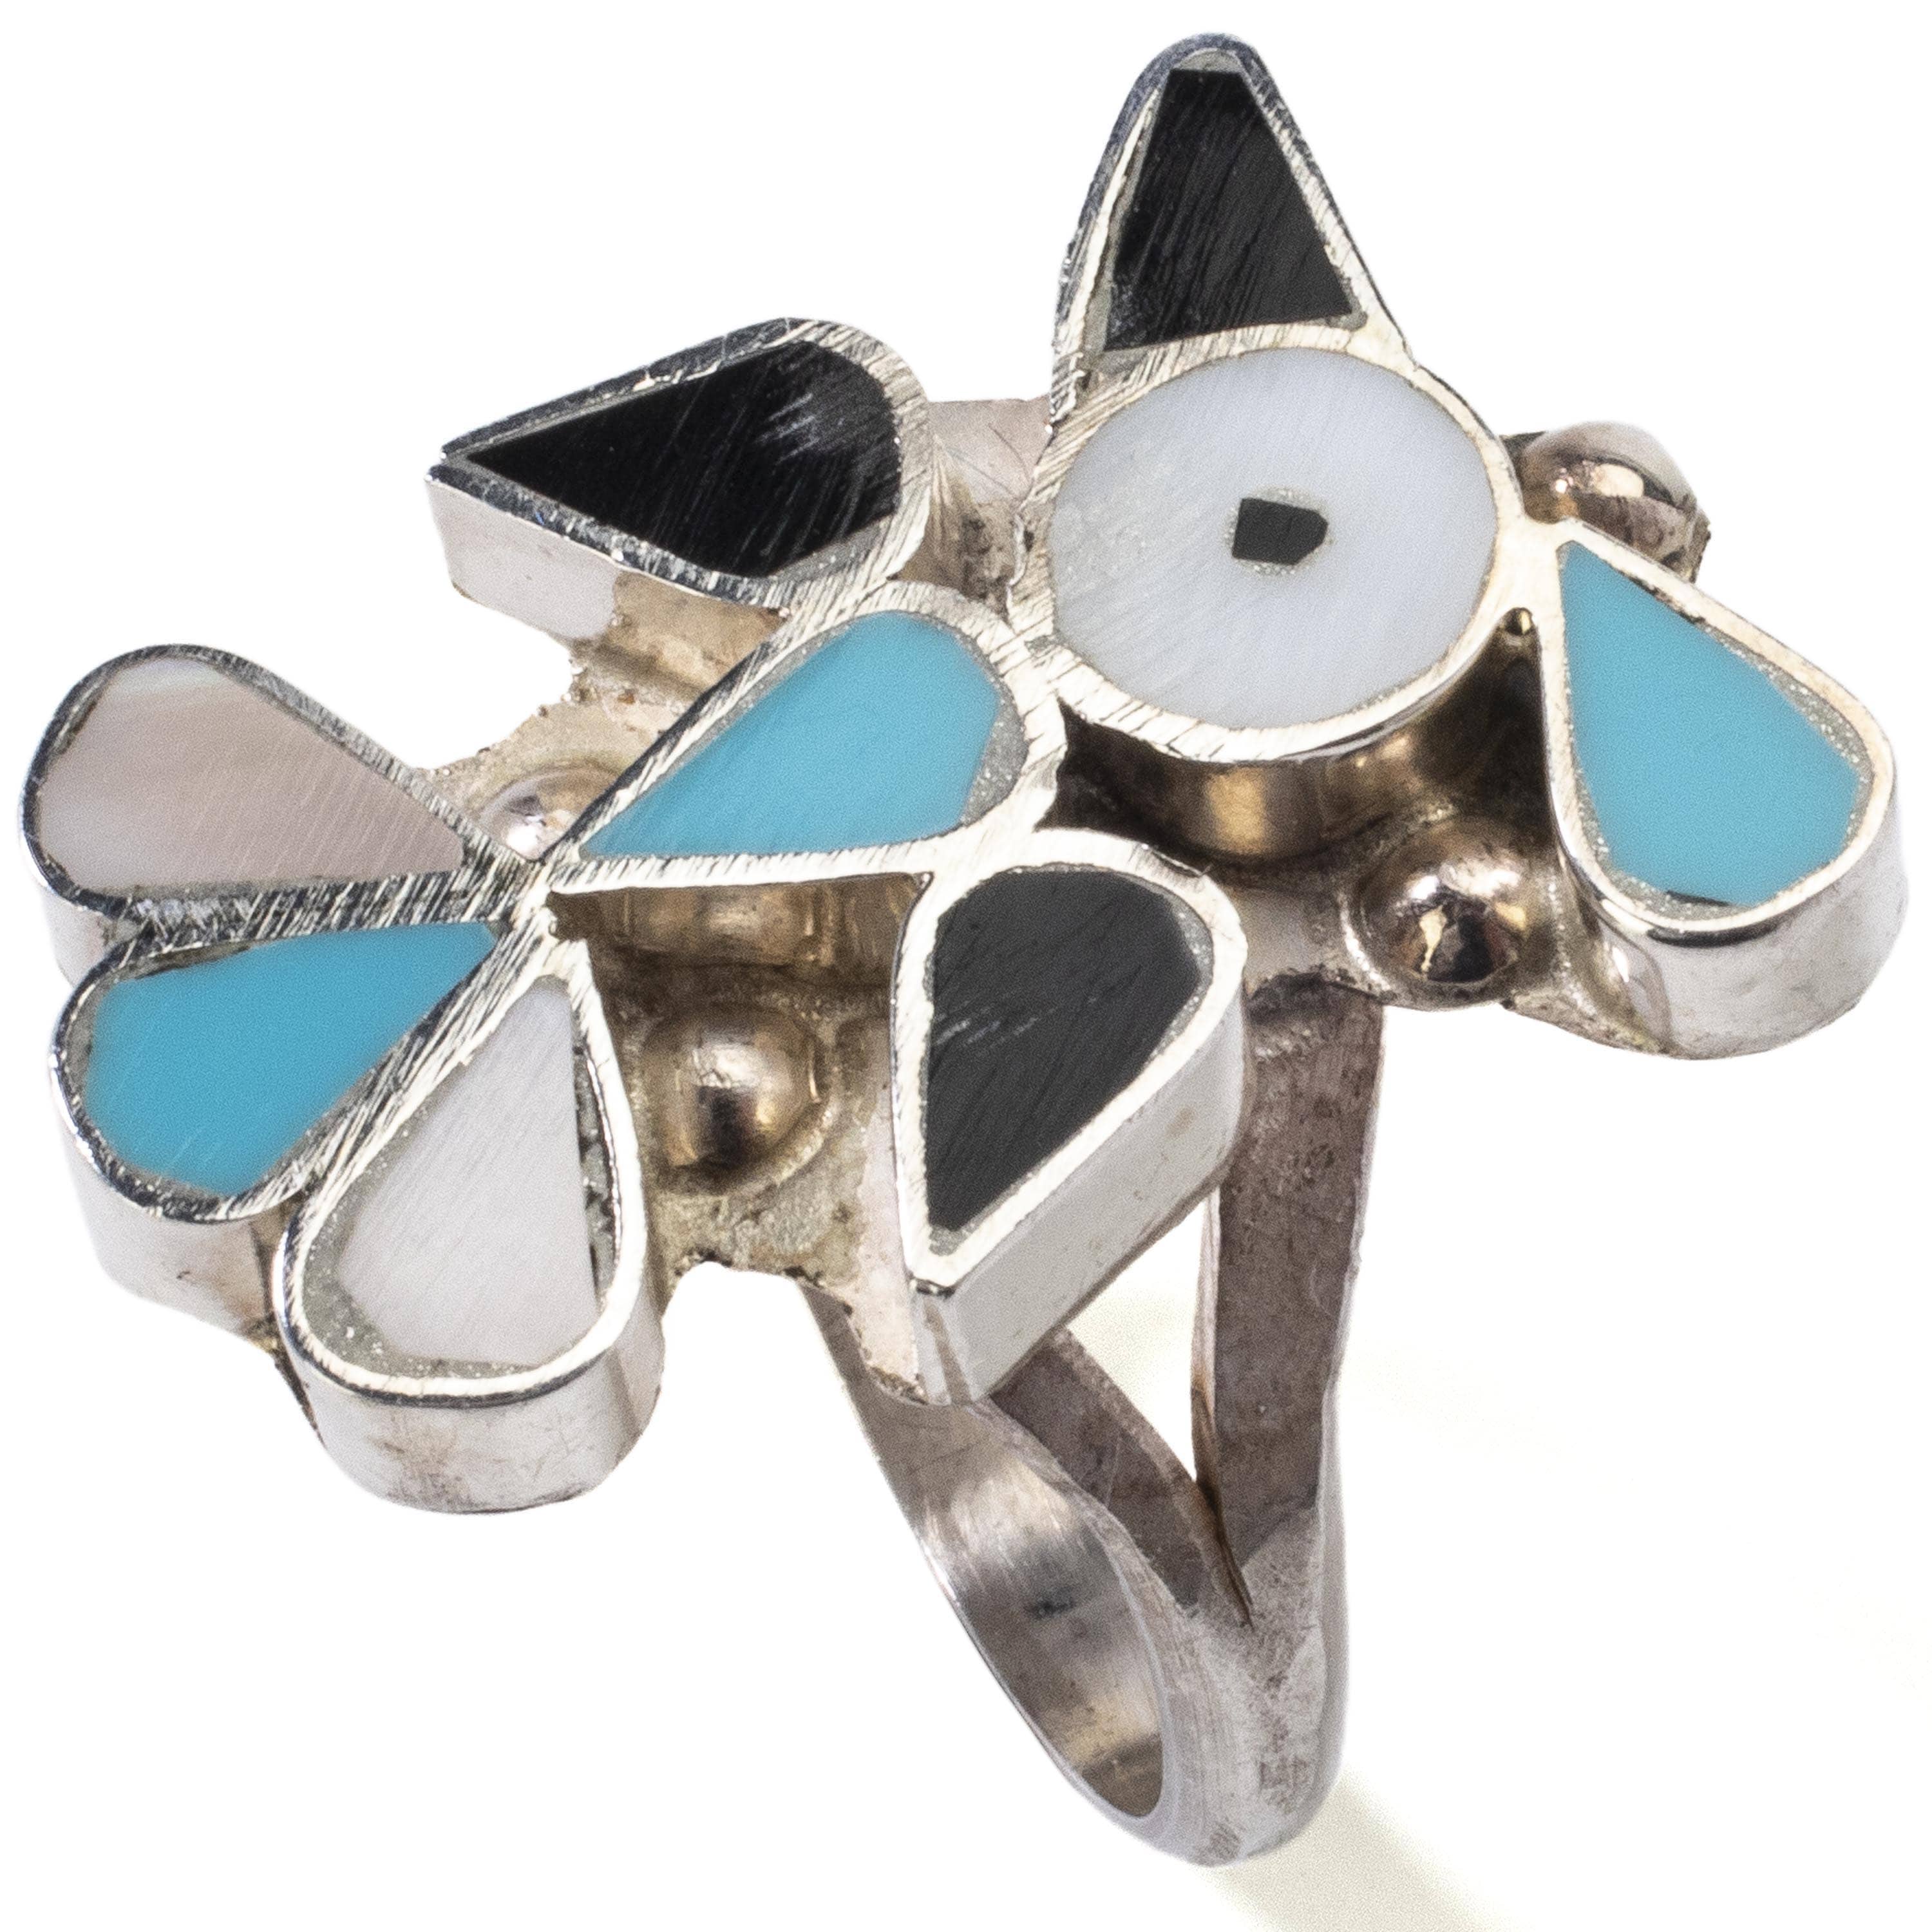 Kalifano Native American Jewelry 6 Pino Yunie Zuni Peyote Bird with Mother of Pearl, Black Onyx, and Turquoise USA Native American Made 925 Sterling Silver Ring NAR200.027.6